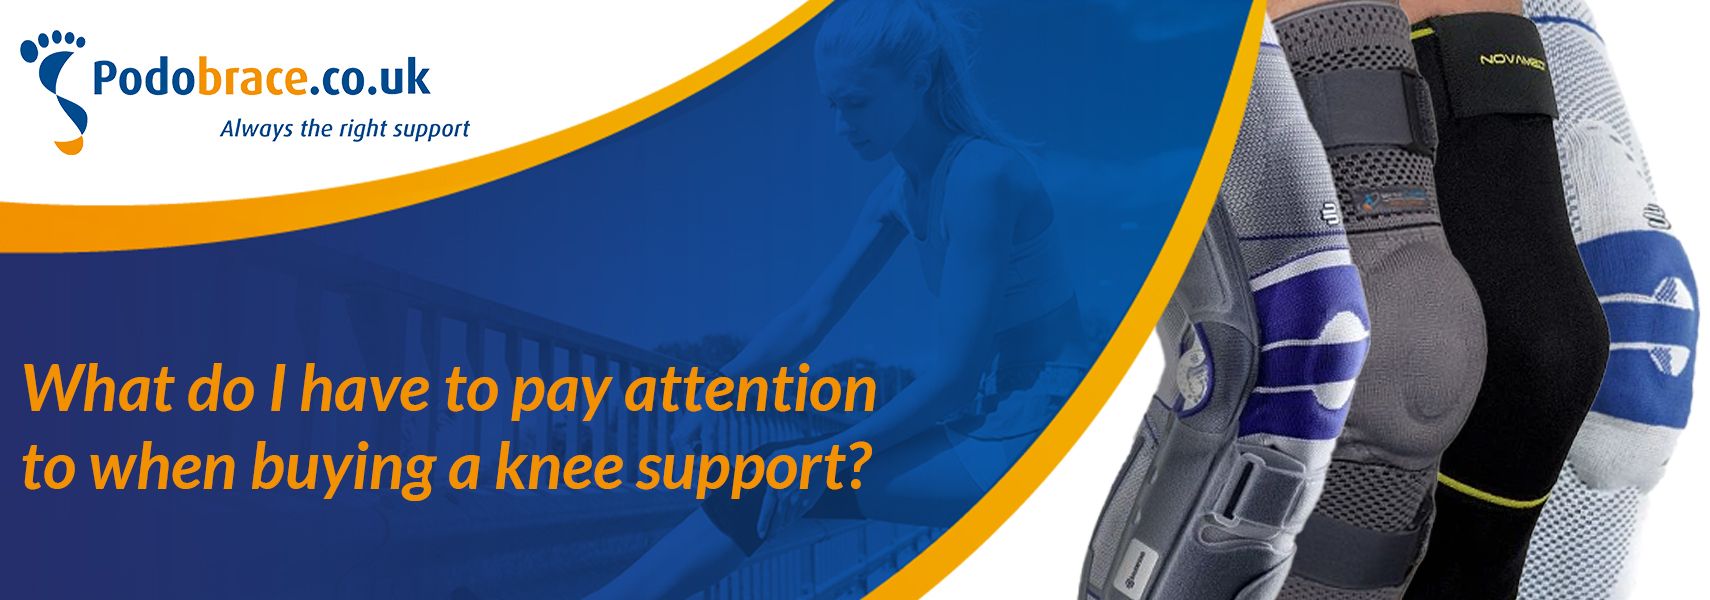 What do i have to pay attention to when buying a knee support